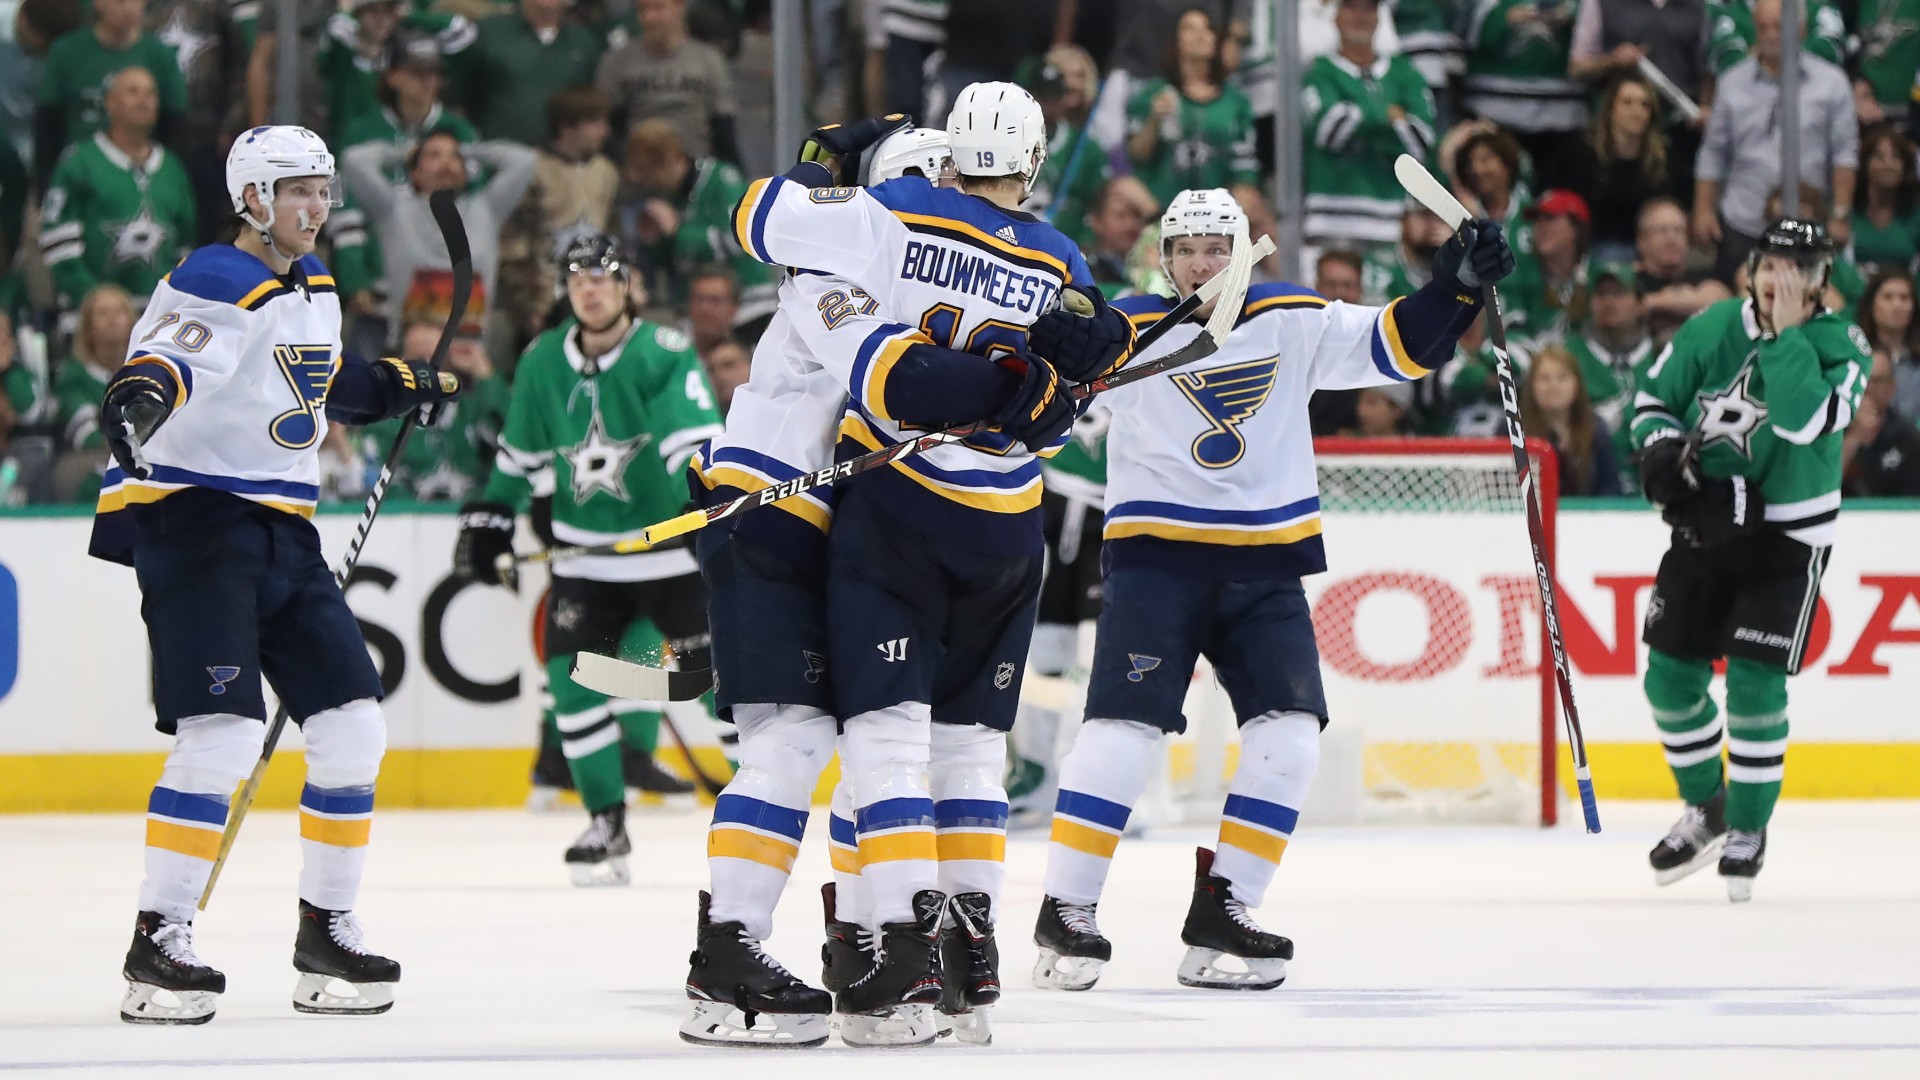 NHL playoffs 2019: Blues remain undefeated on the road after wild third period | Sporting News